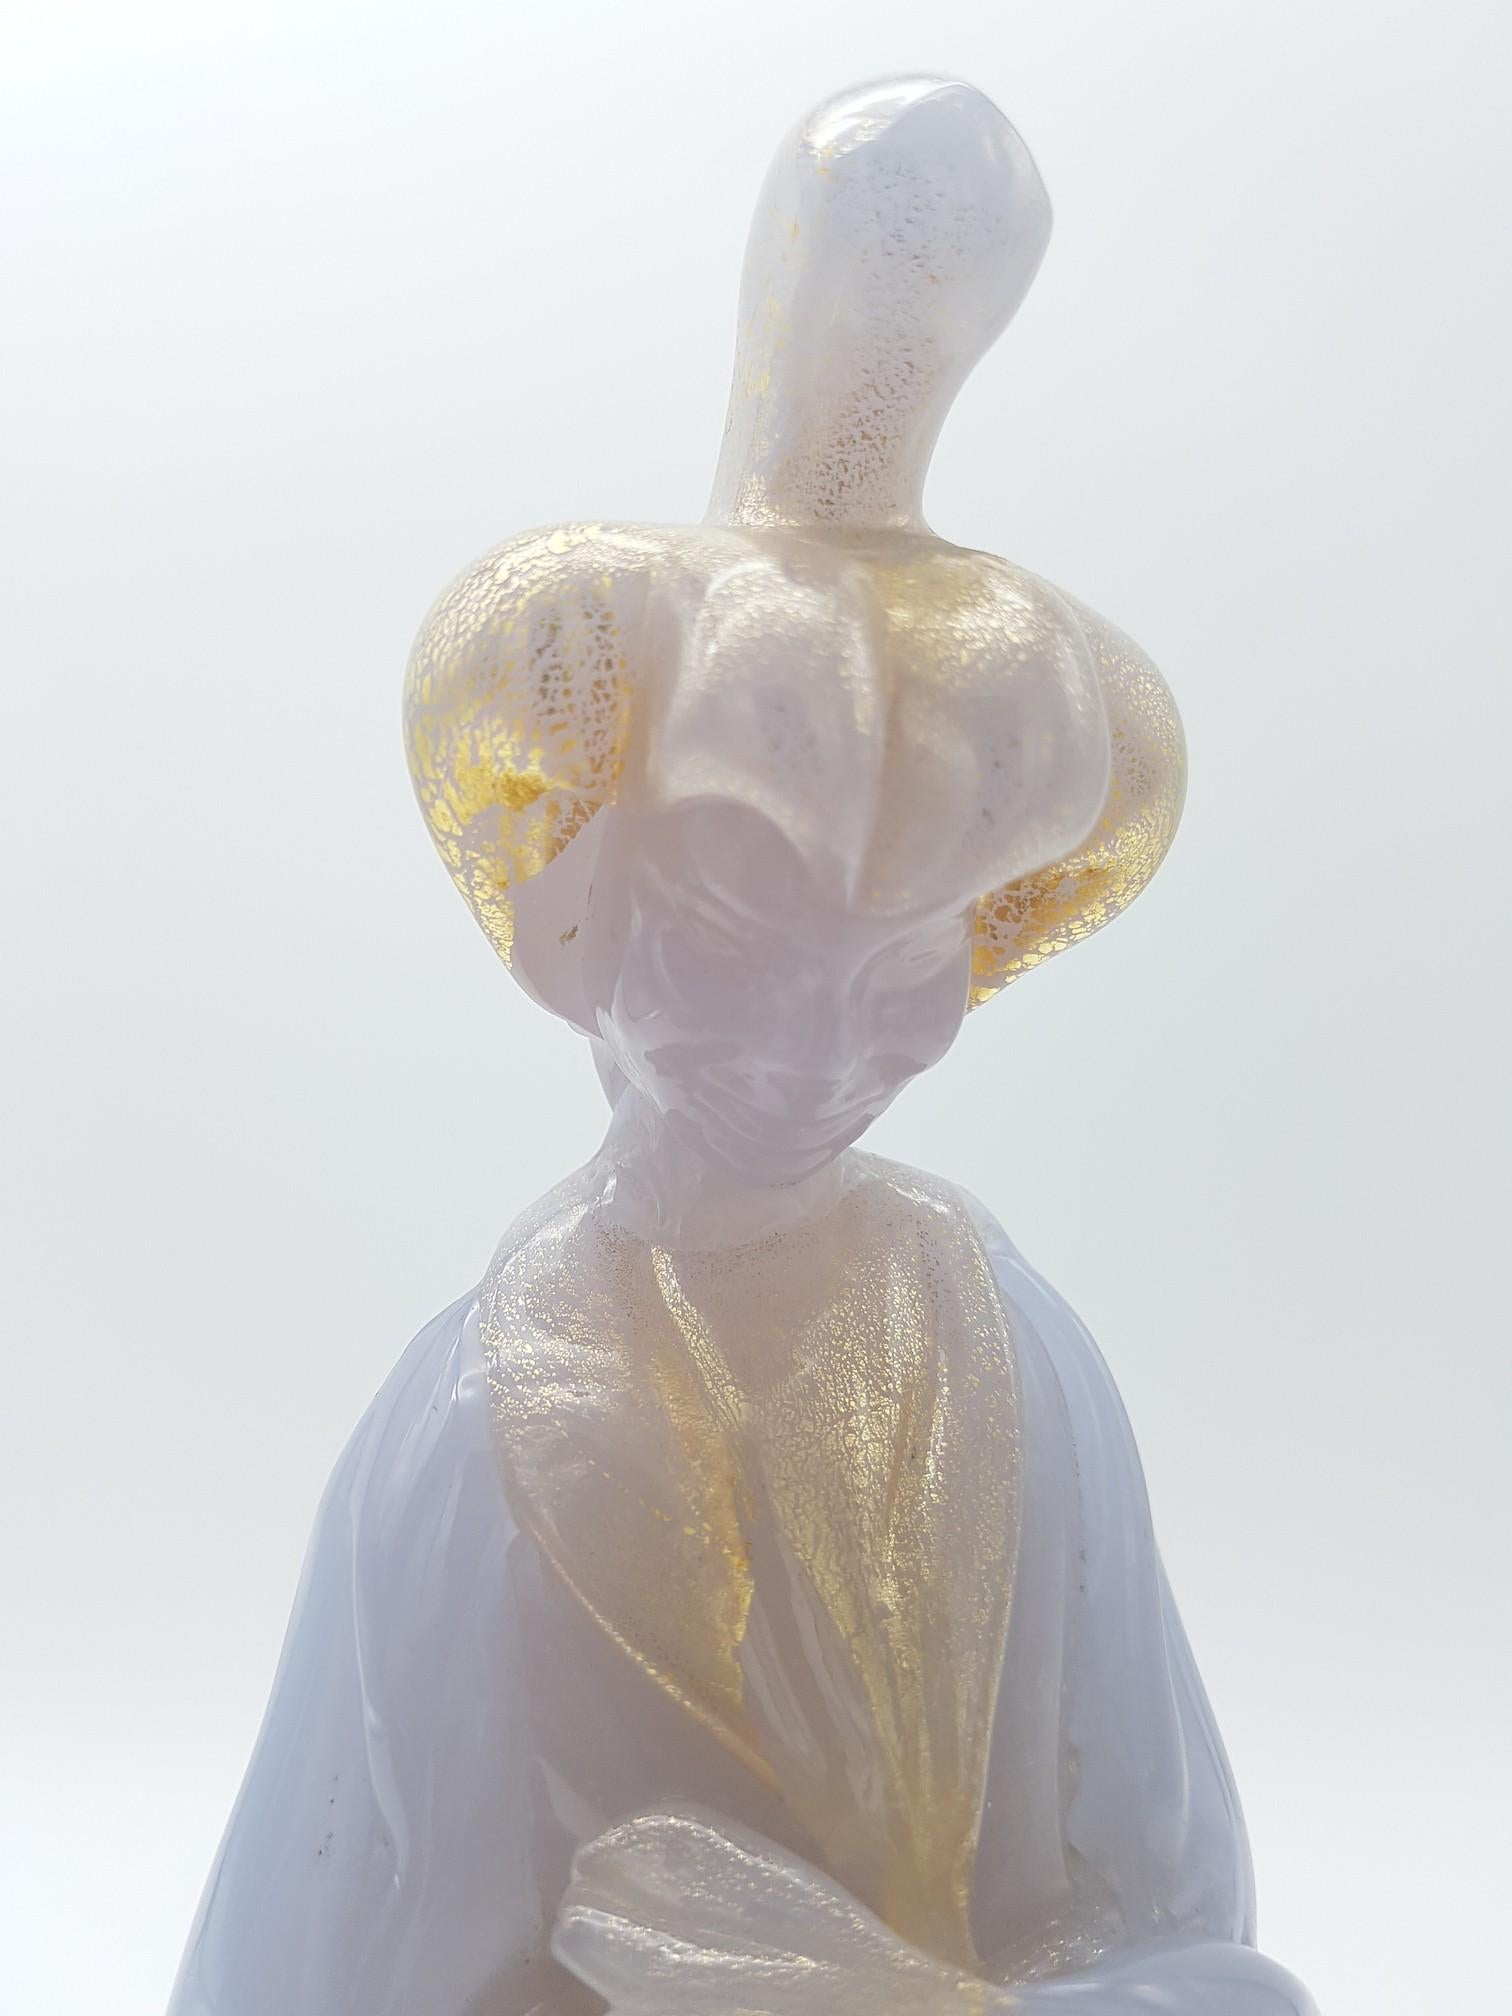 Vintage Murano Glass Geisha Figurine by Ermanno Nason at Cenedese, Late 1960s For Sale 3